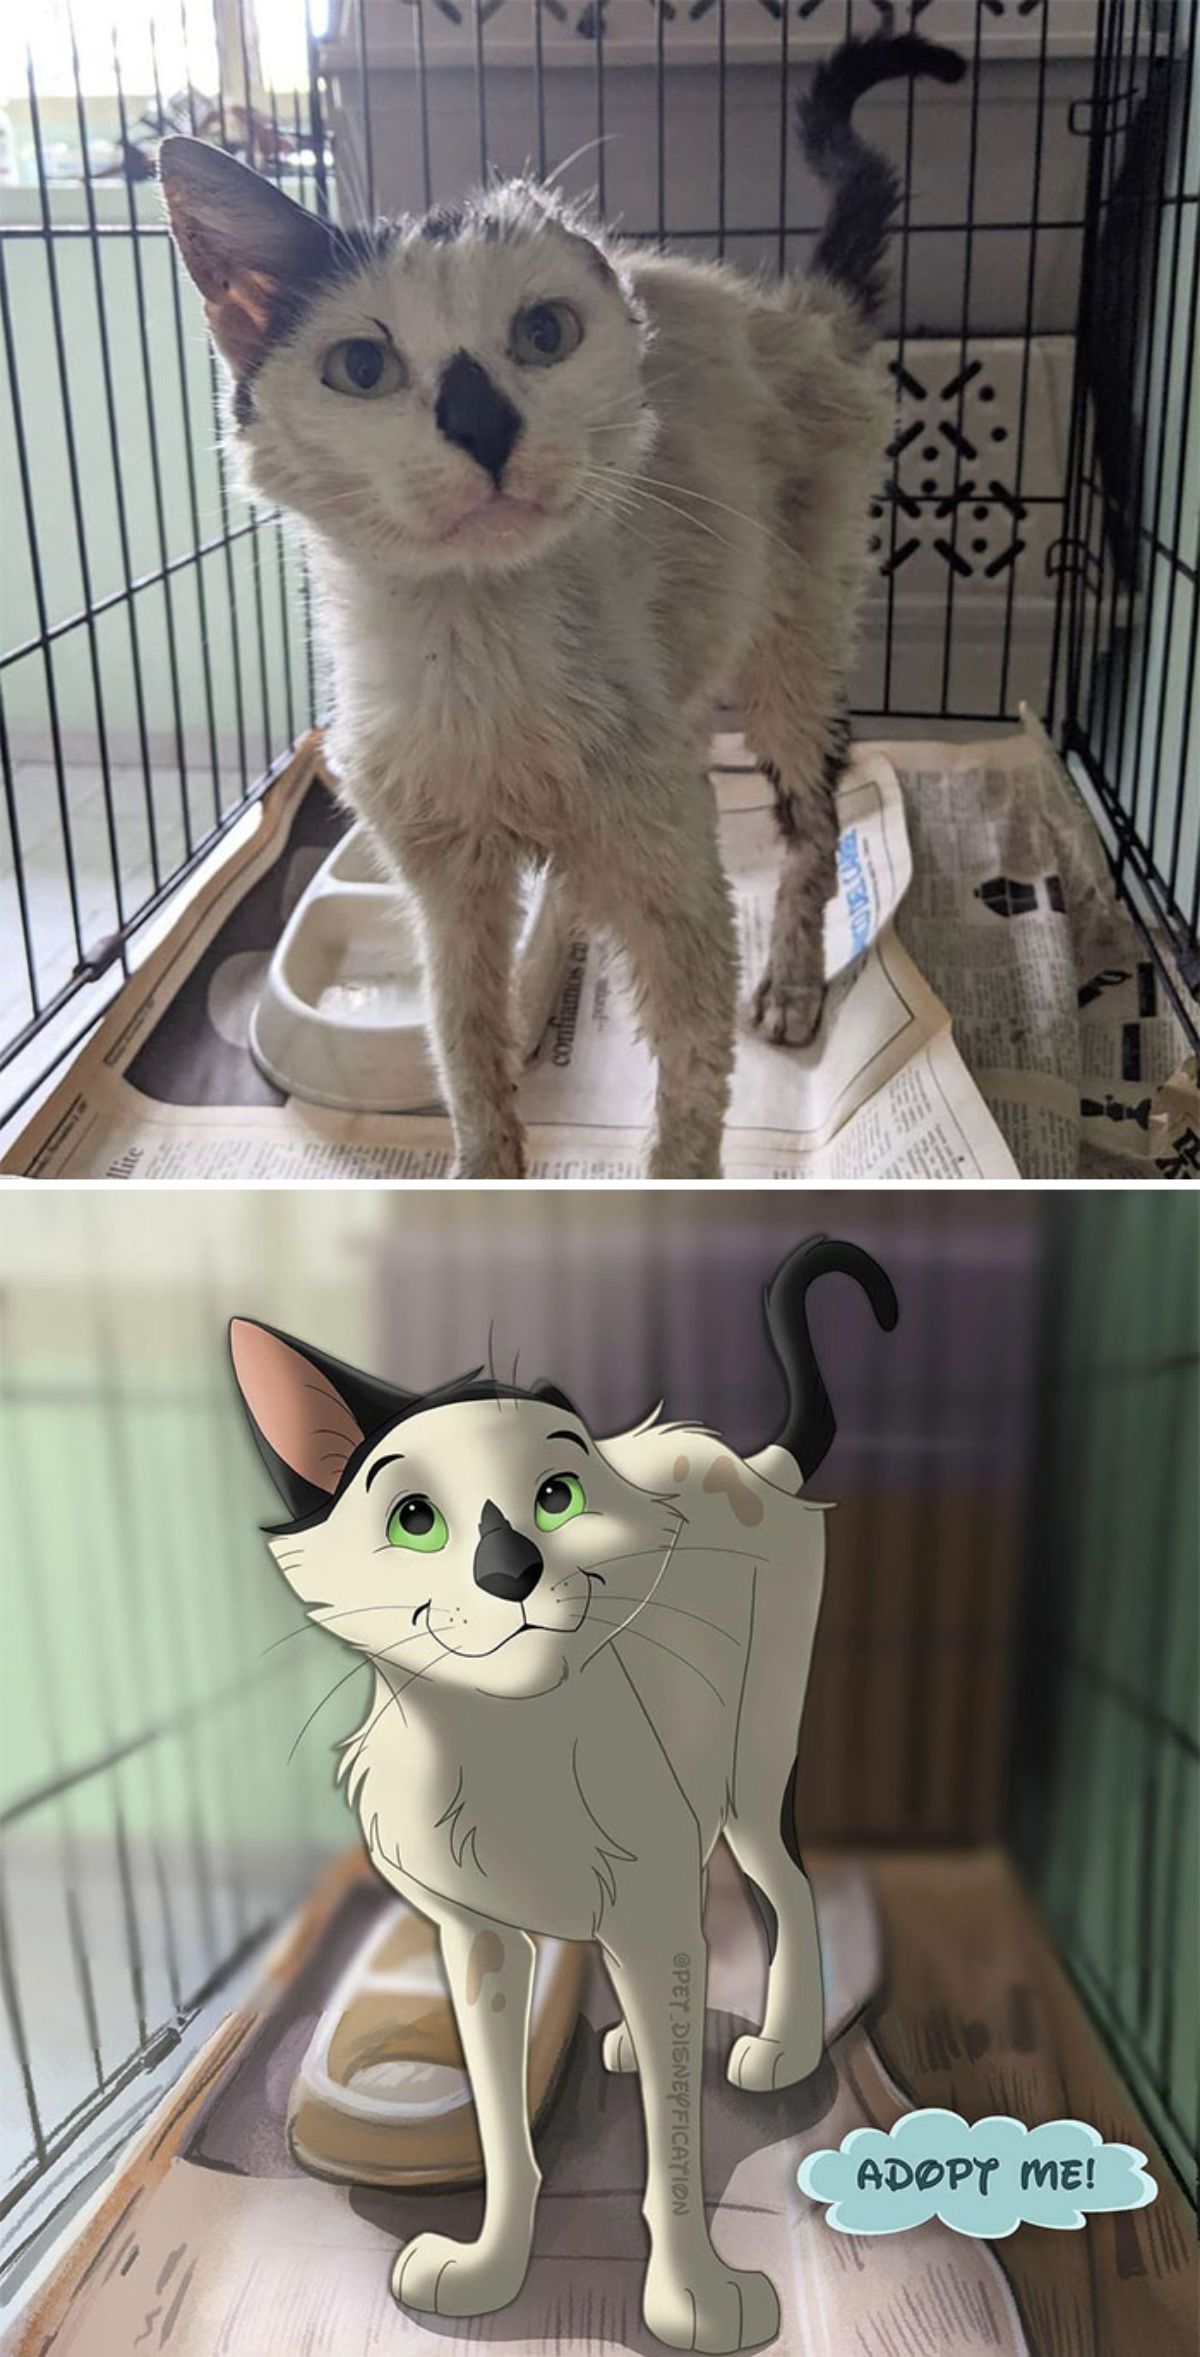 real photo and cartoon image of a one-eared black and white cat standing in a cage